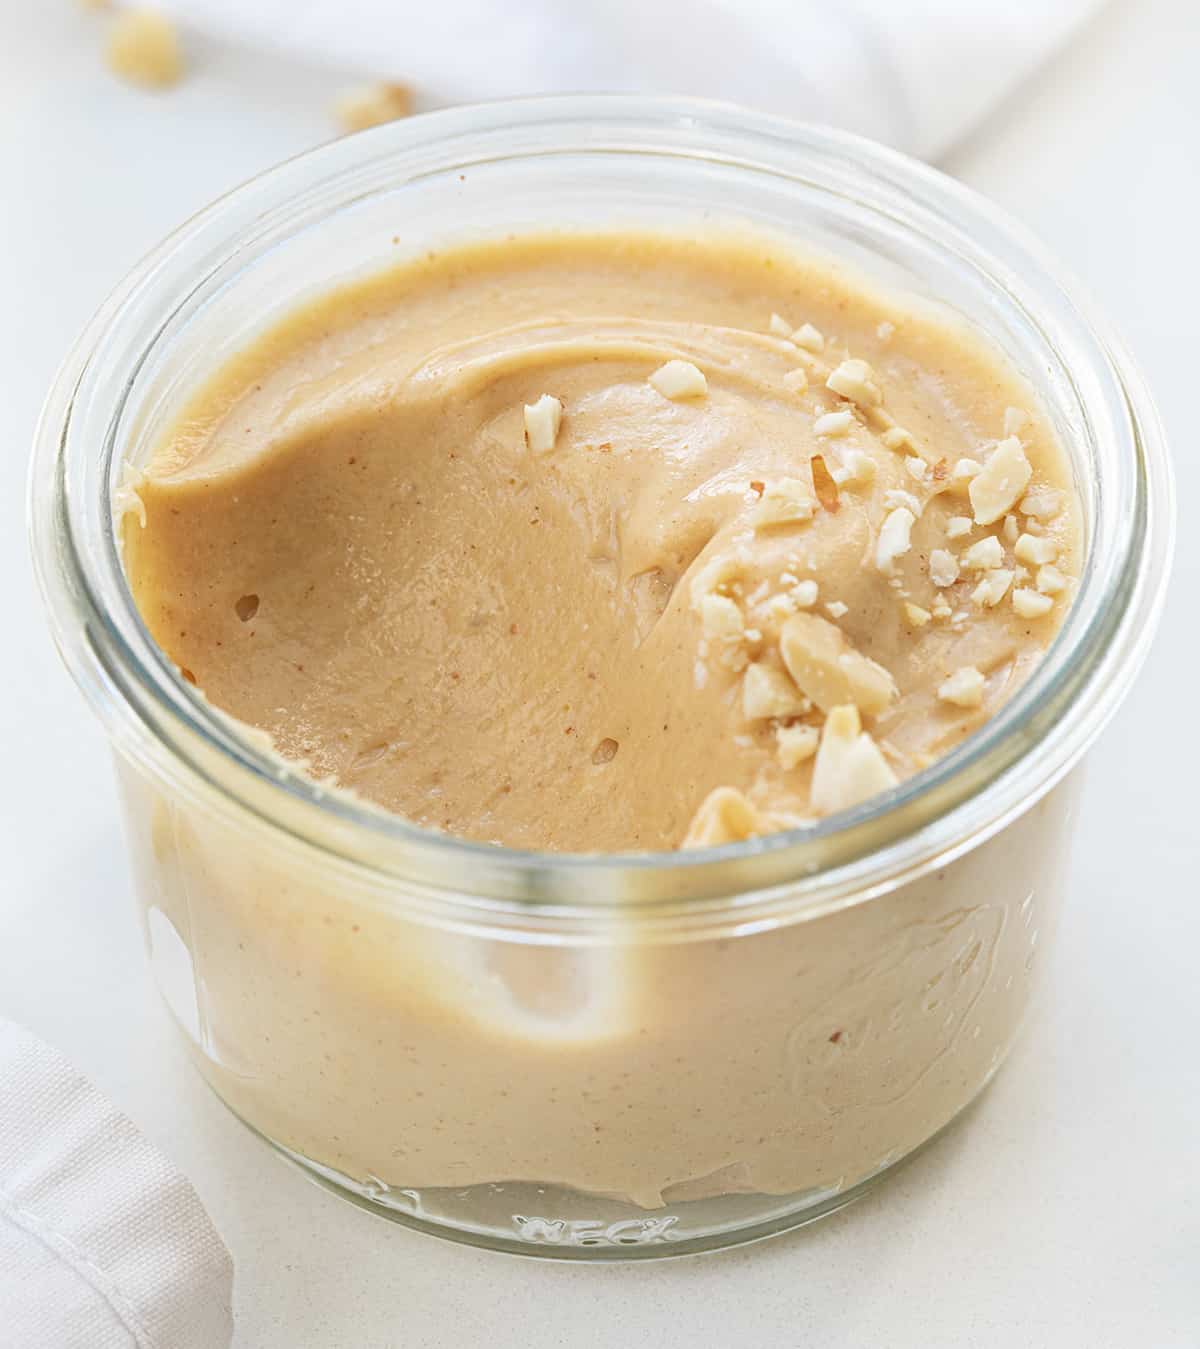 Container of Peanut Butter Mousse with a Spoonful Removed Showing More Texture.